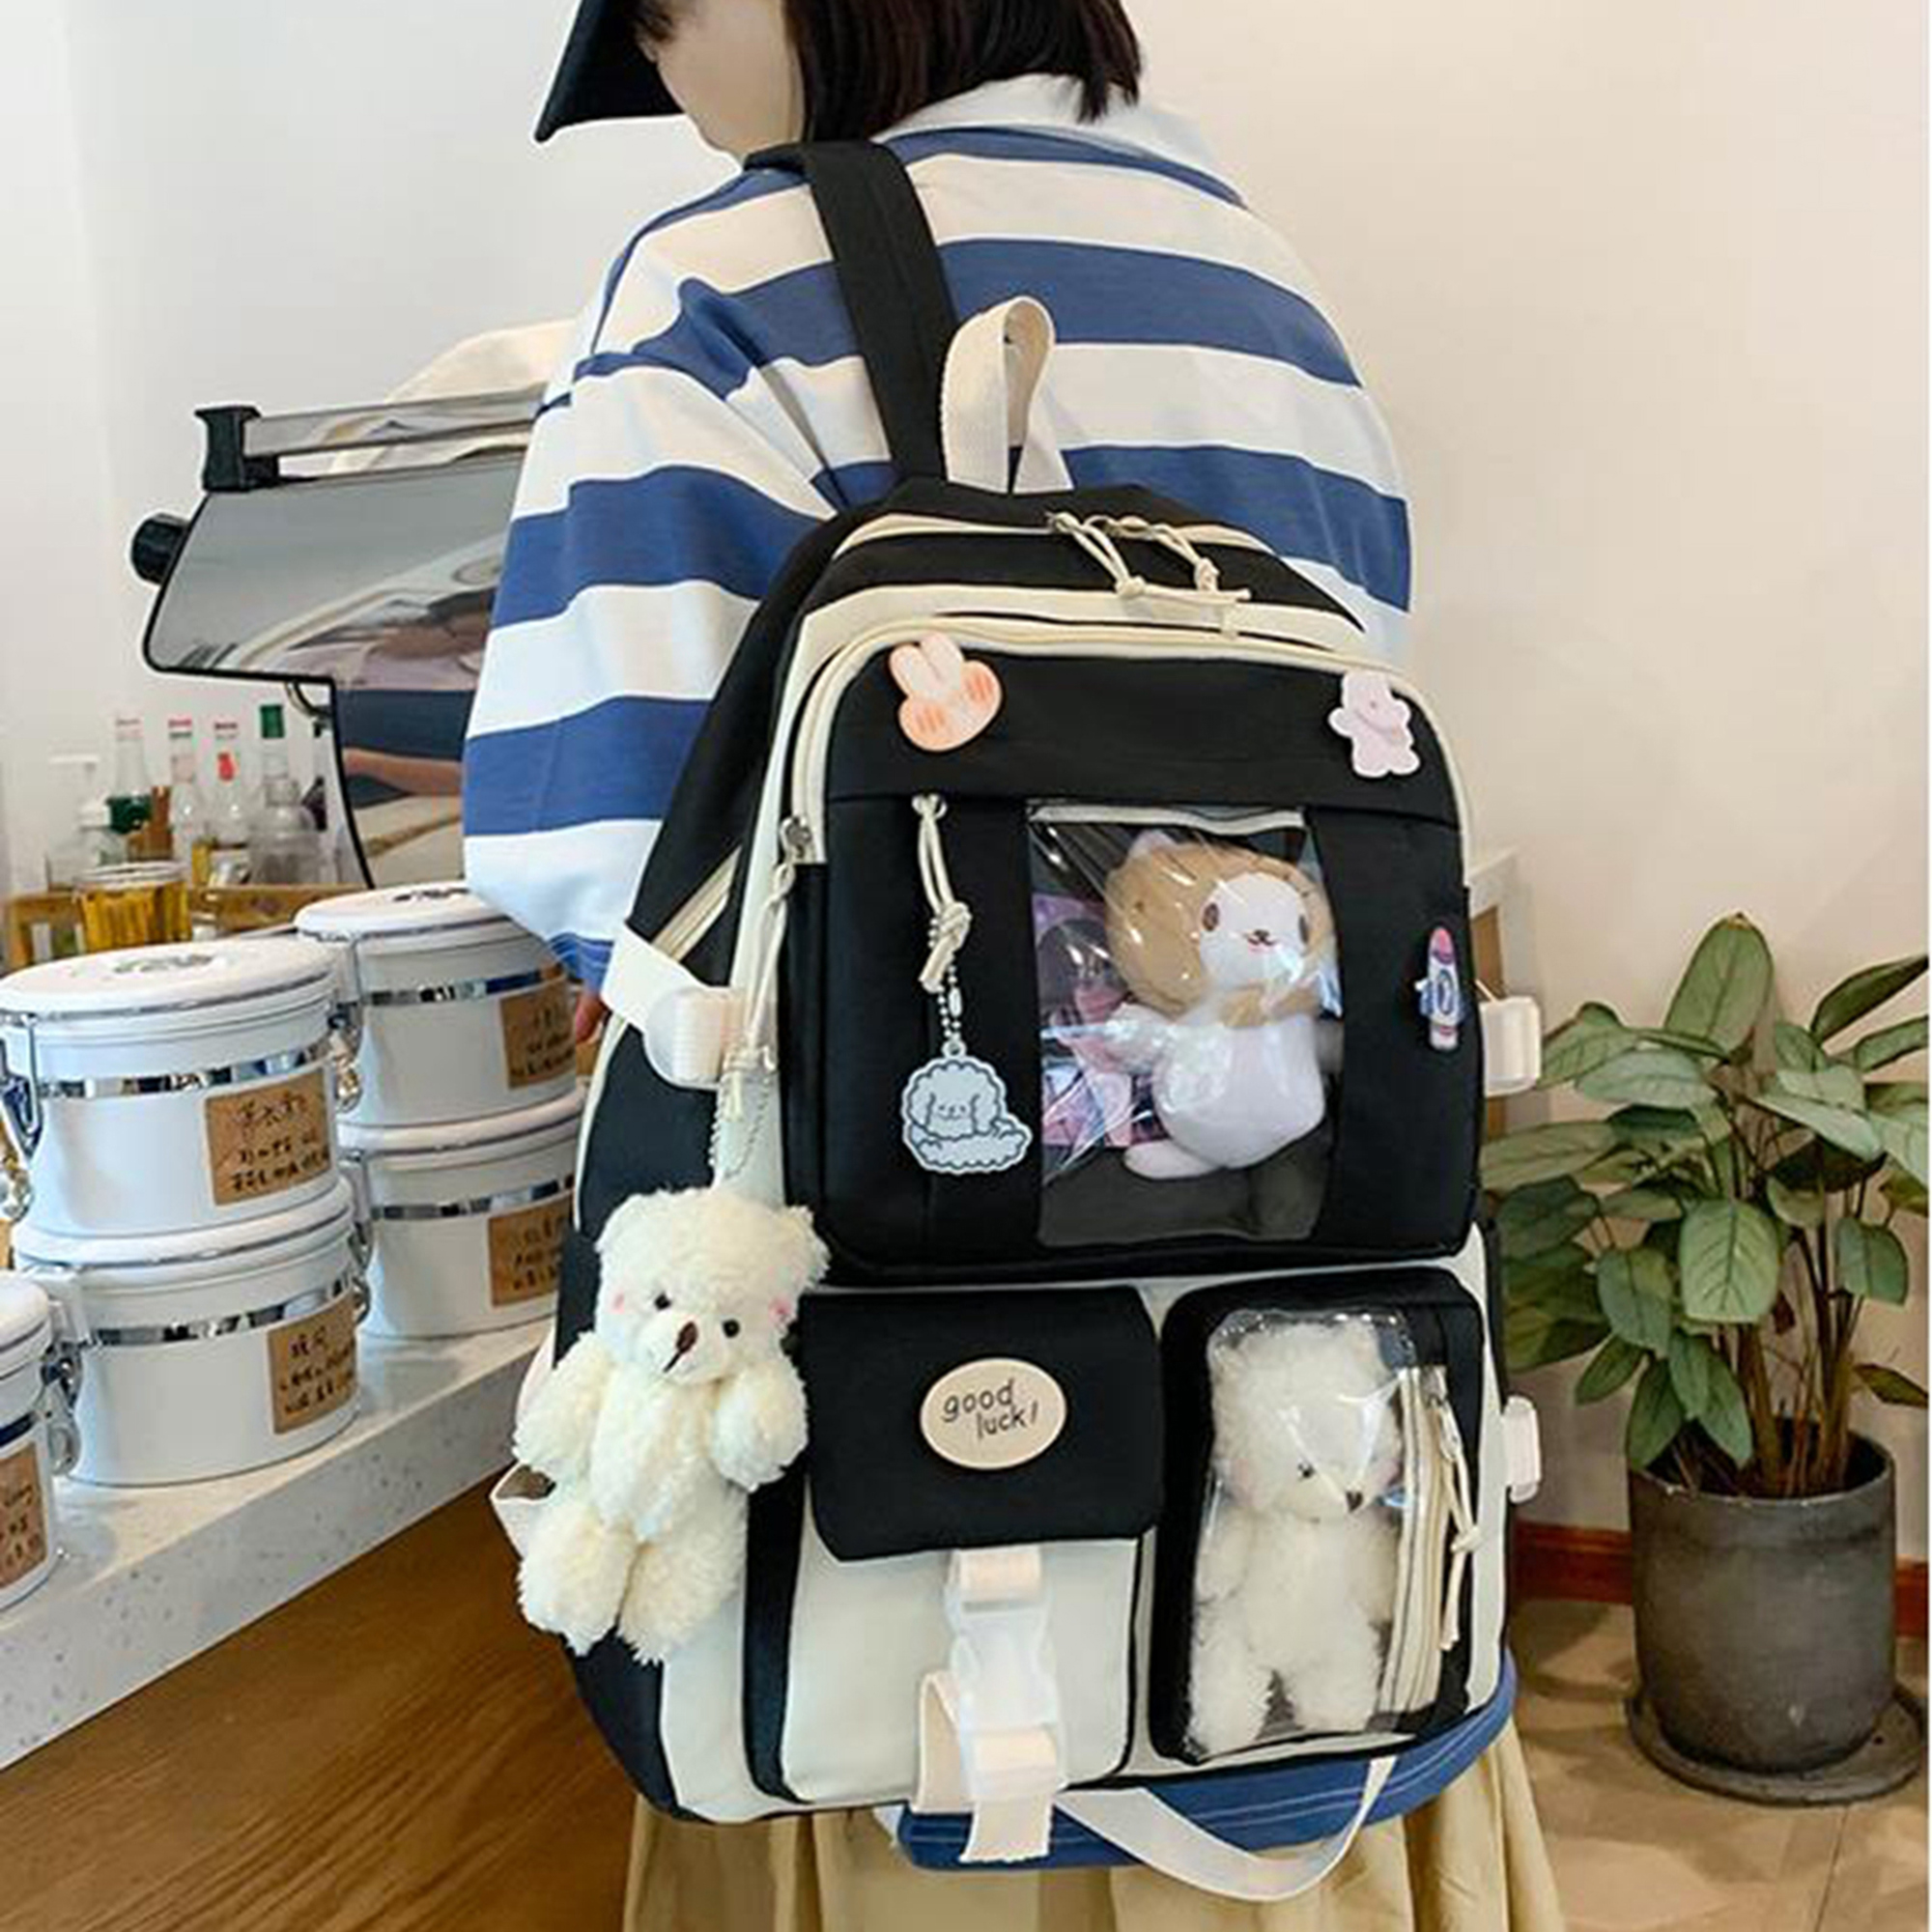 Cute Backpacks for Teen Girls, 16 Inch Kawaii Backpack with Kawaii Pin and Accessories, 5Pcs Backpack Set,Backpack,Drawstring Bag, Shoulderbag, Pencil Case and Wallet - image 5 of 7